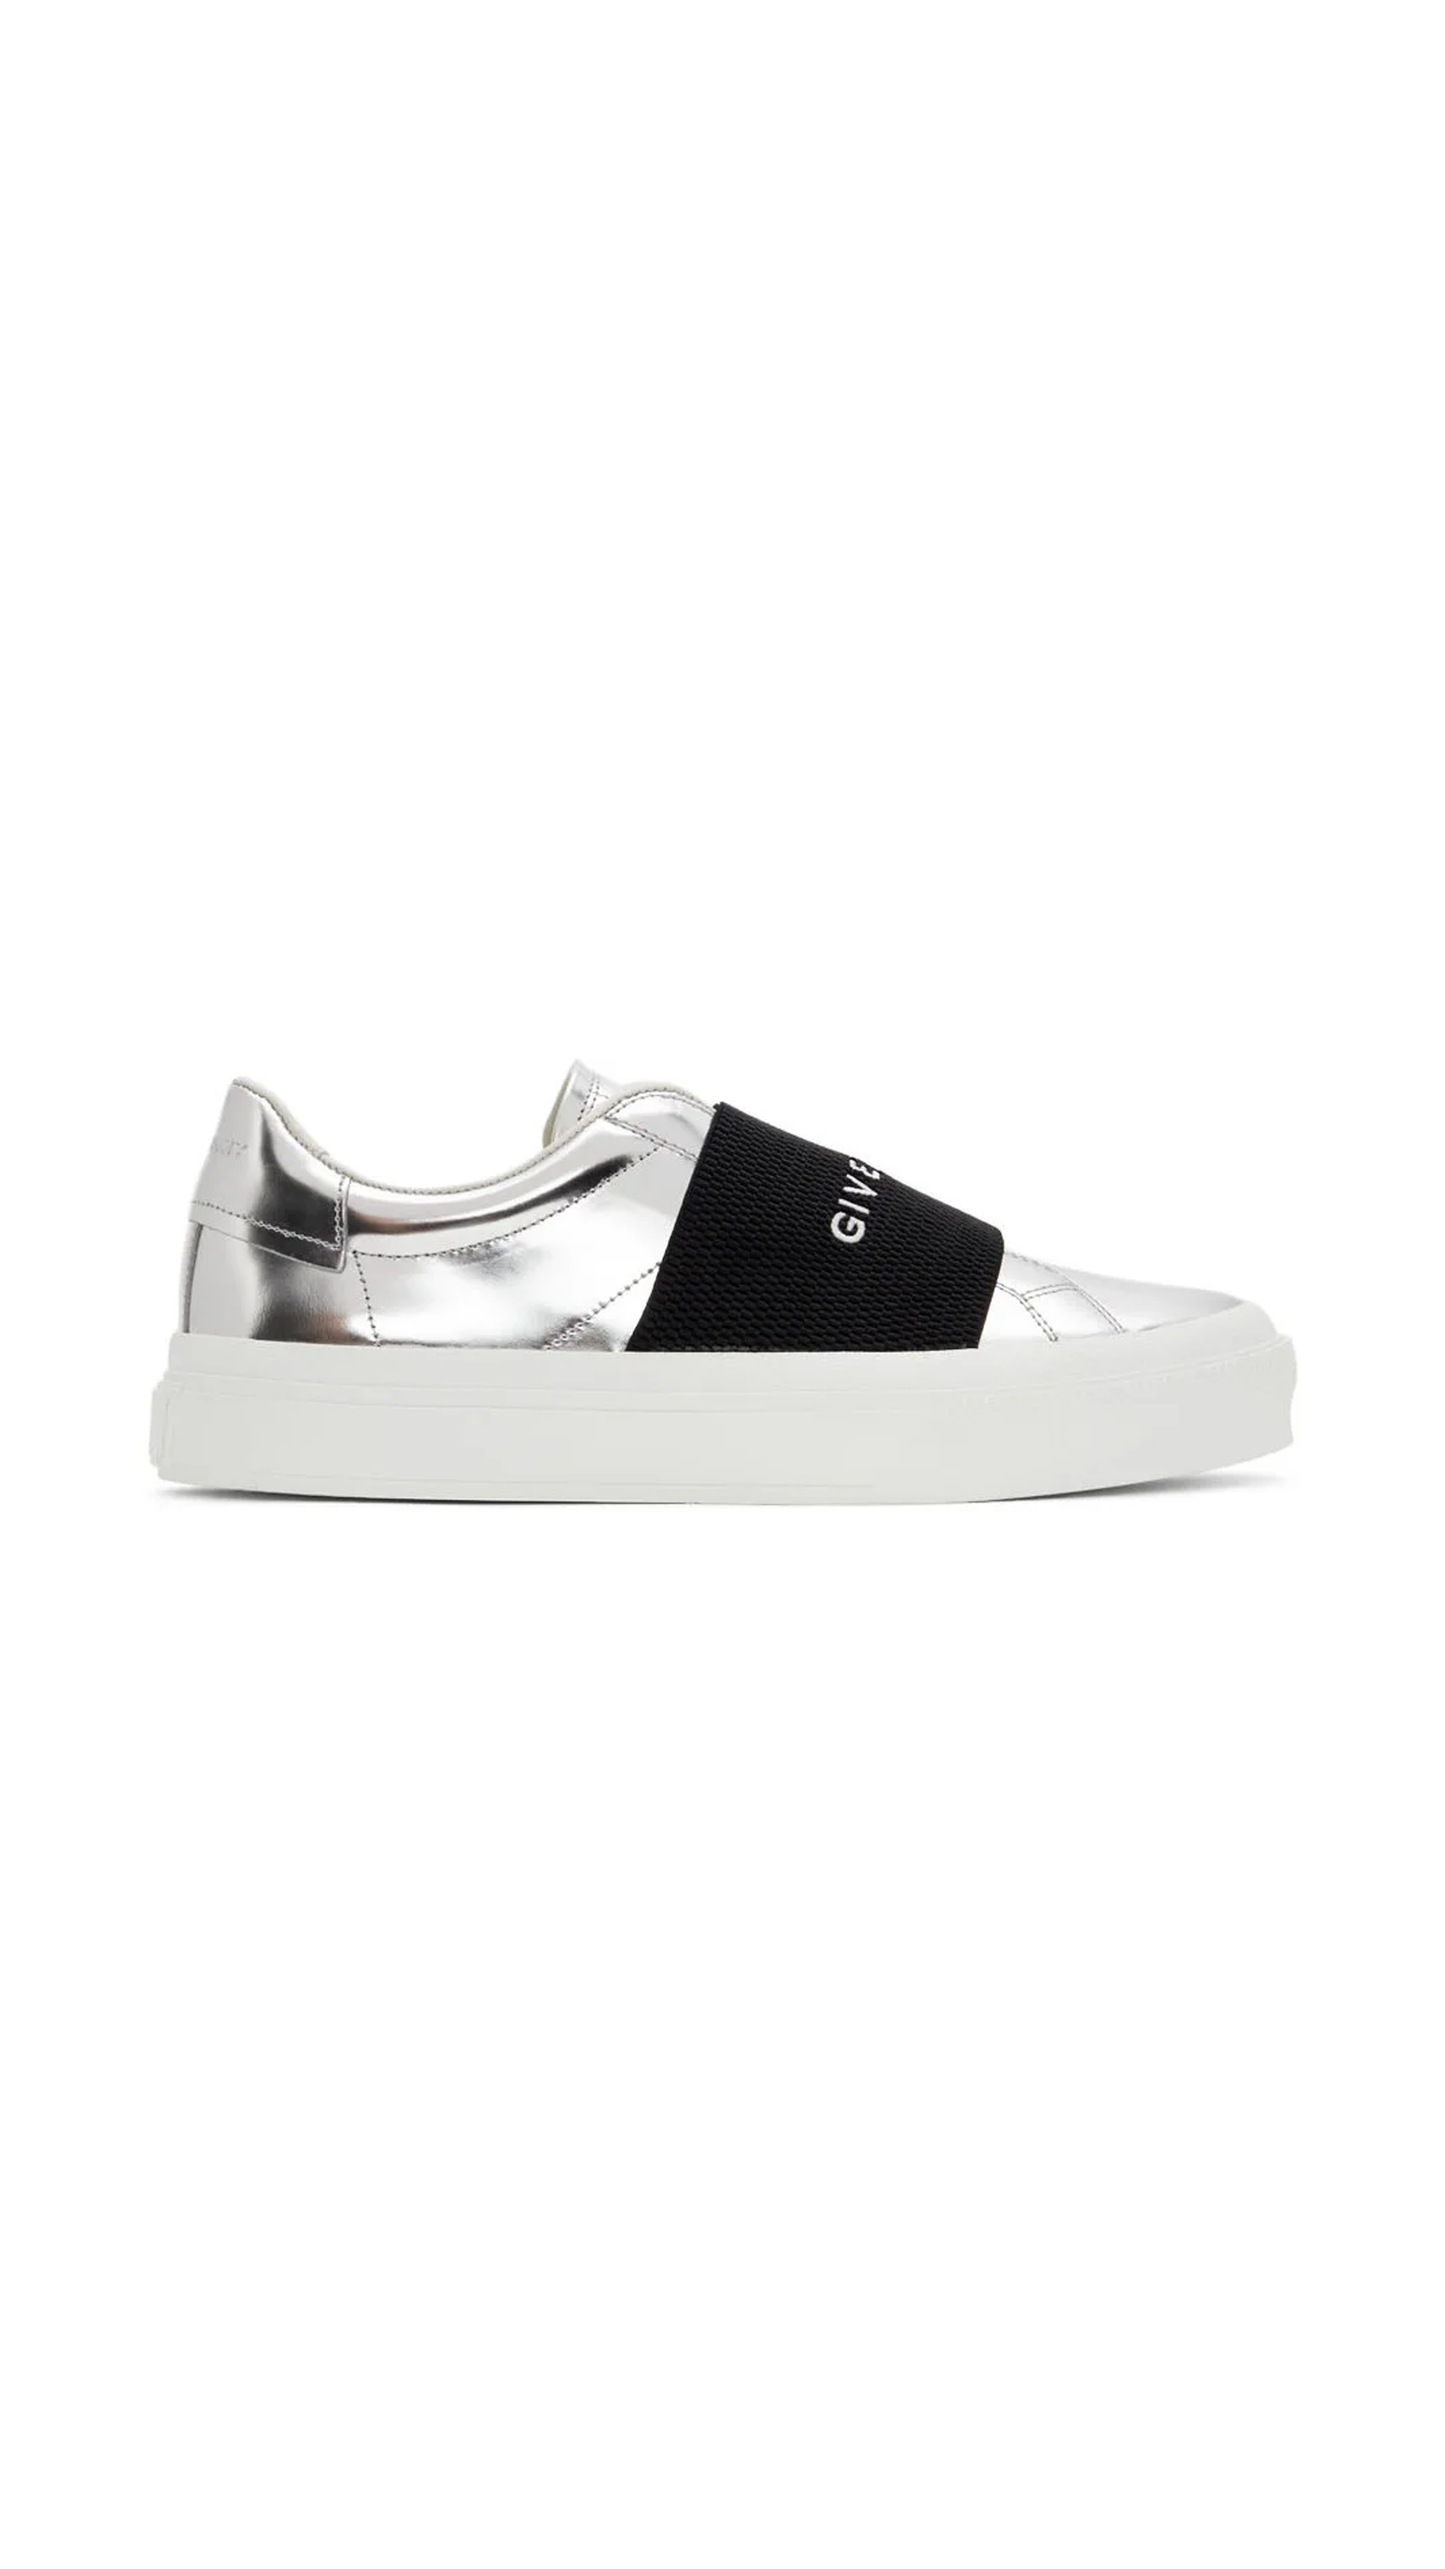 City Court Sneakers -  Silver / Black